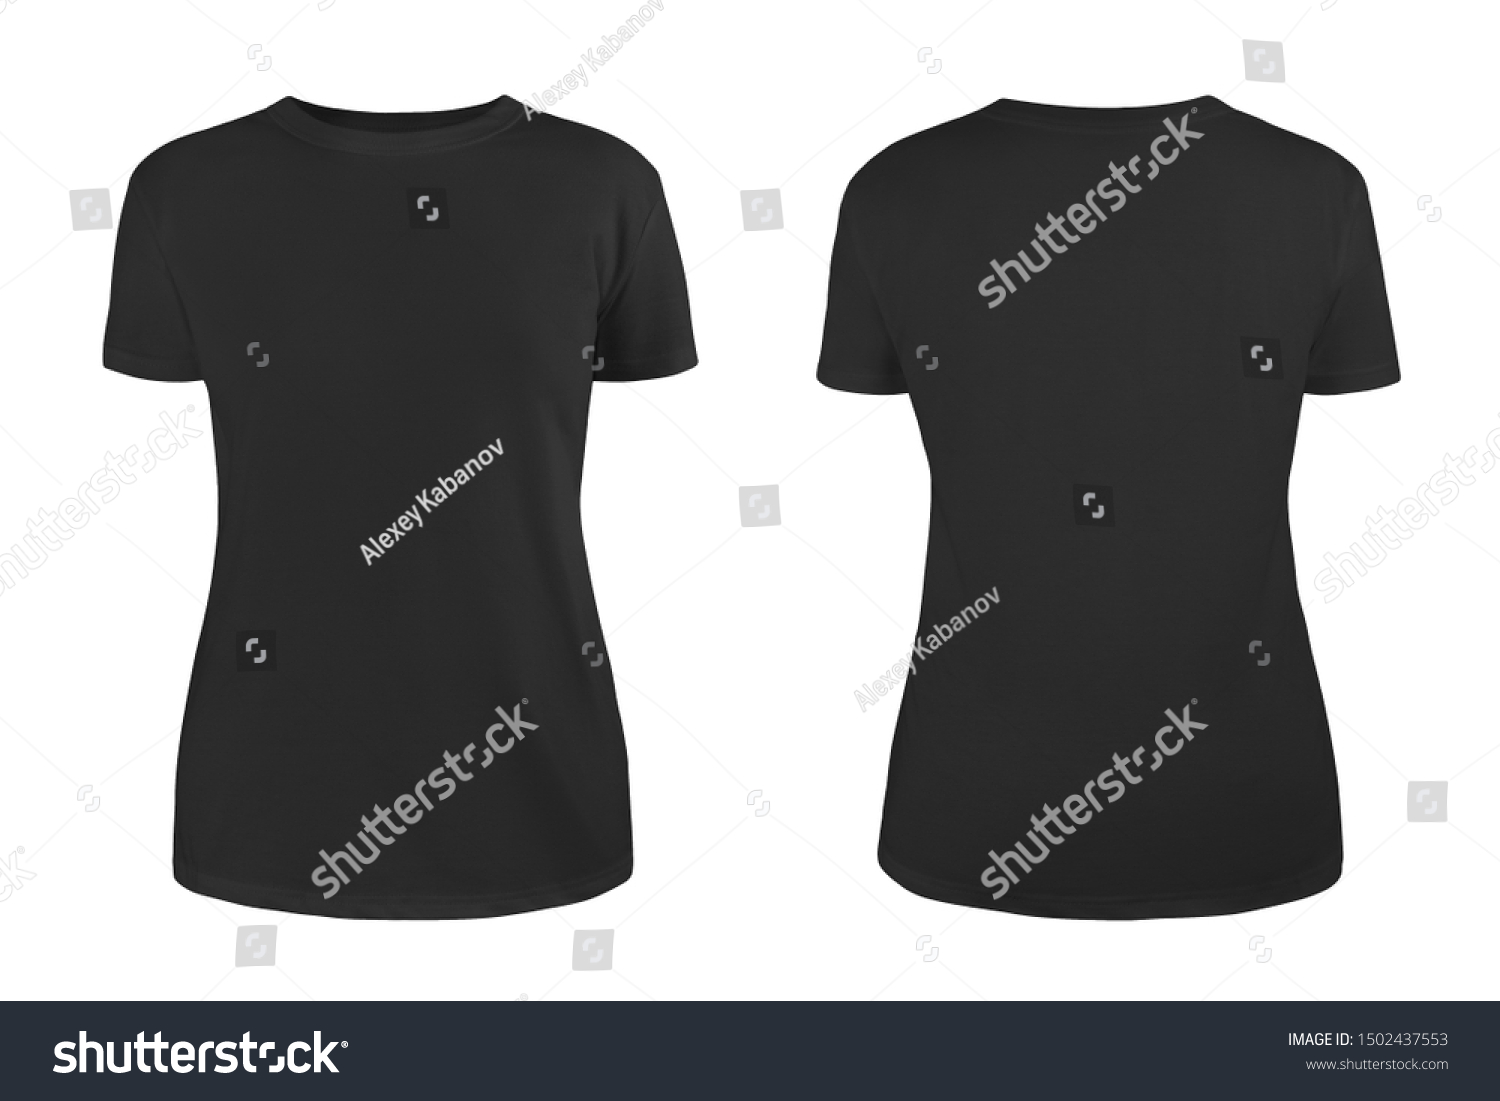 Women's black blank T-shirt template,from two sides, natural shape on invisible mannequin, for your design mockup for print, isolated on white background.
 #1502437553